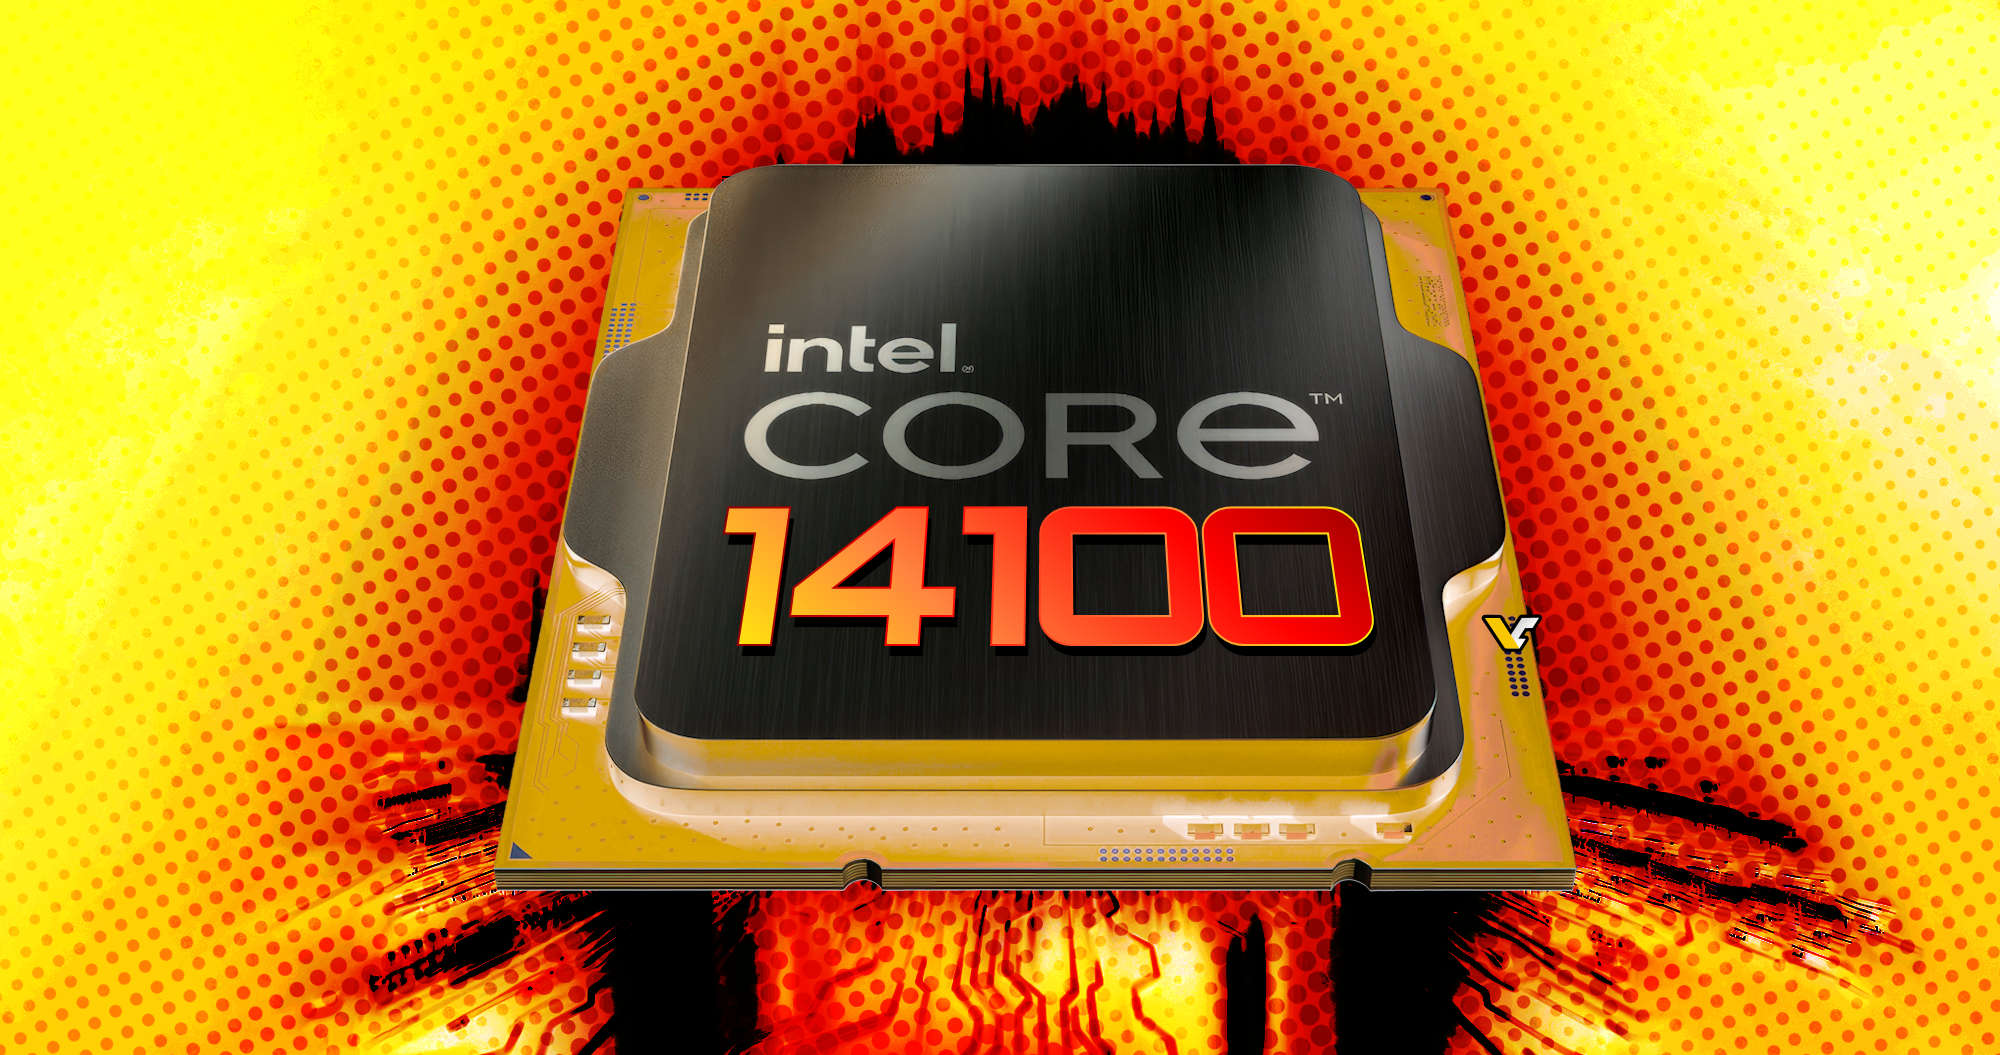 Is an Intel Core i3 good enough for PC gaming?, Ask an expert